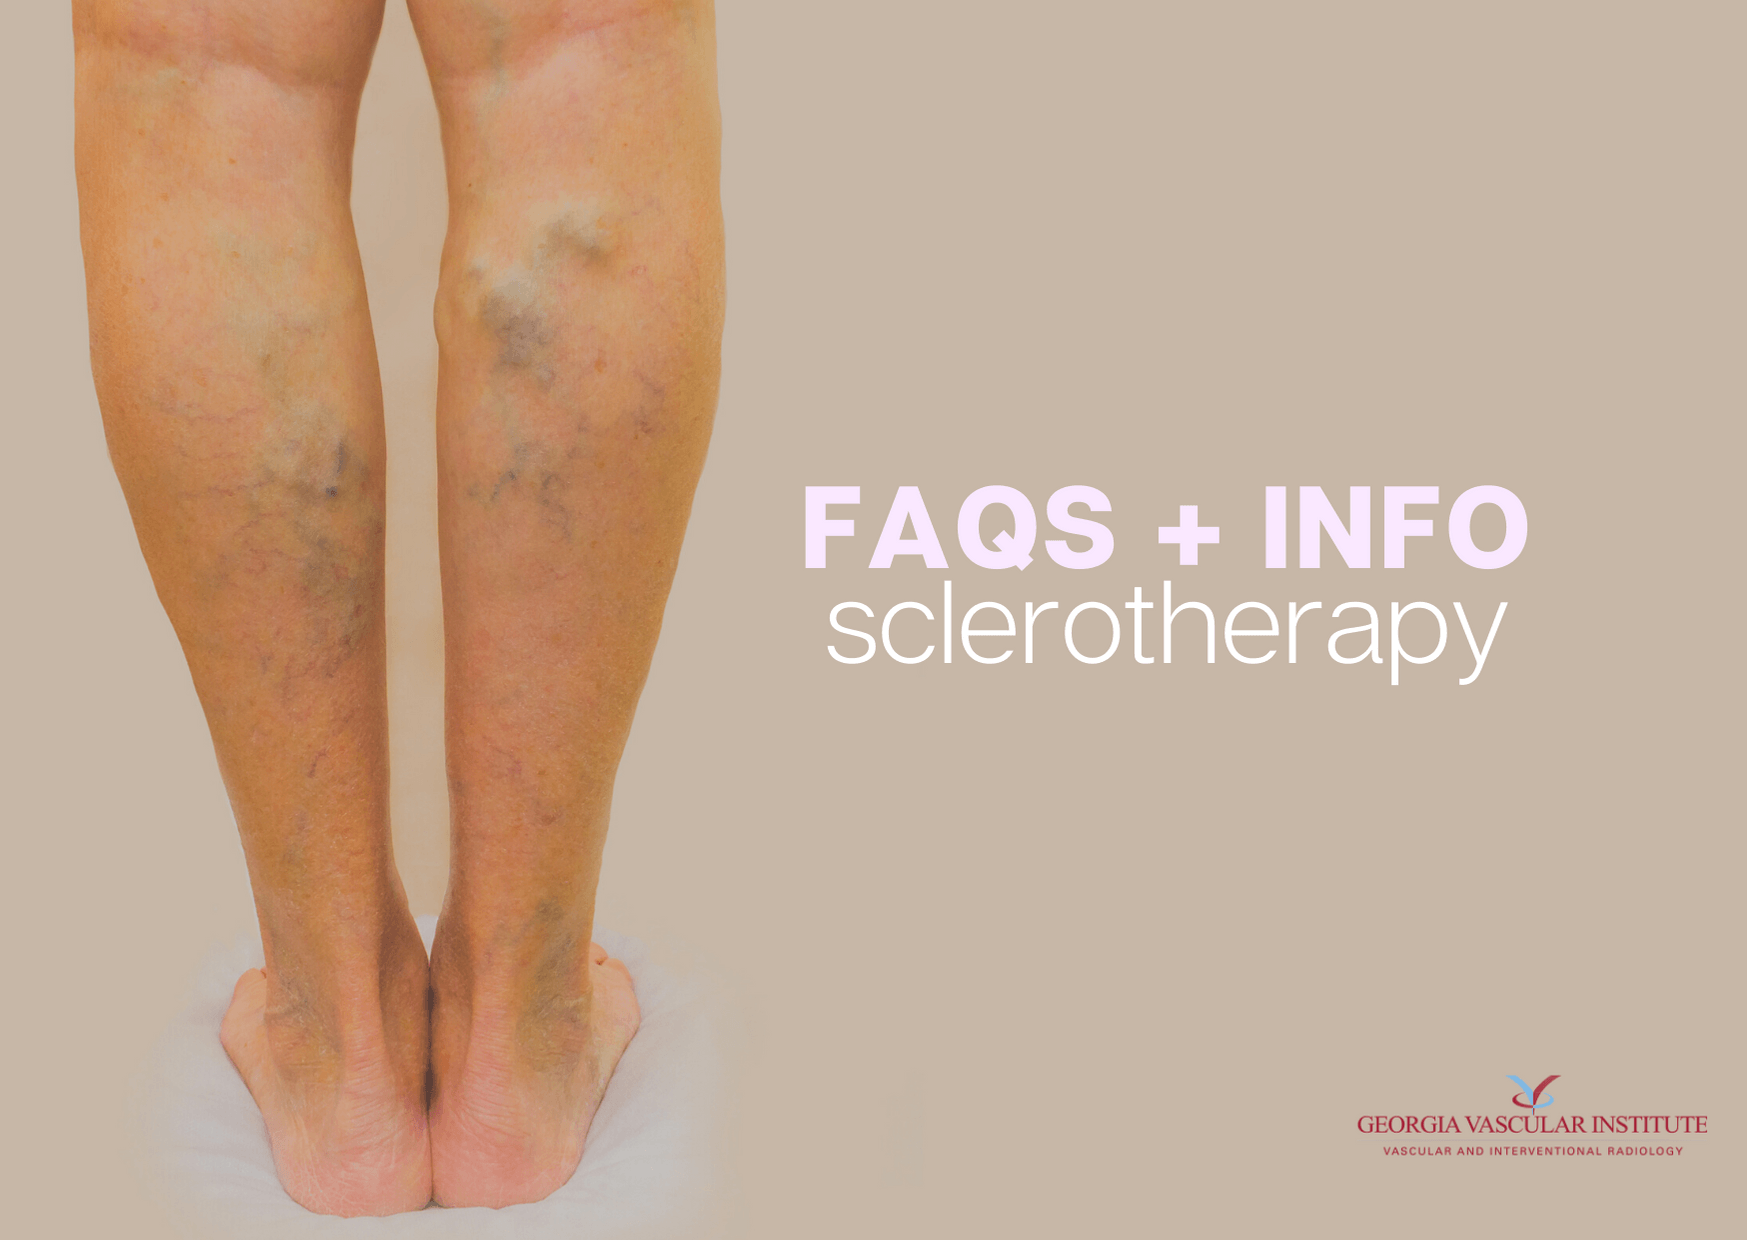 Sclerotherapy for Varicose Veins at Georgia Vascular Institute